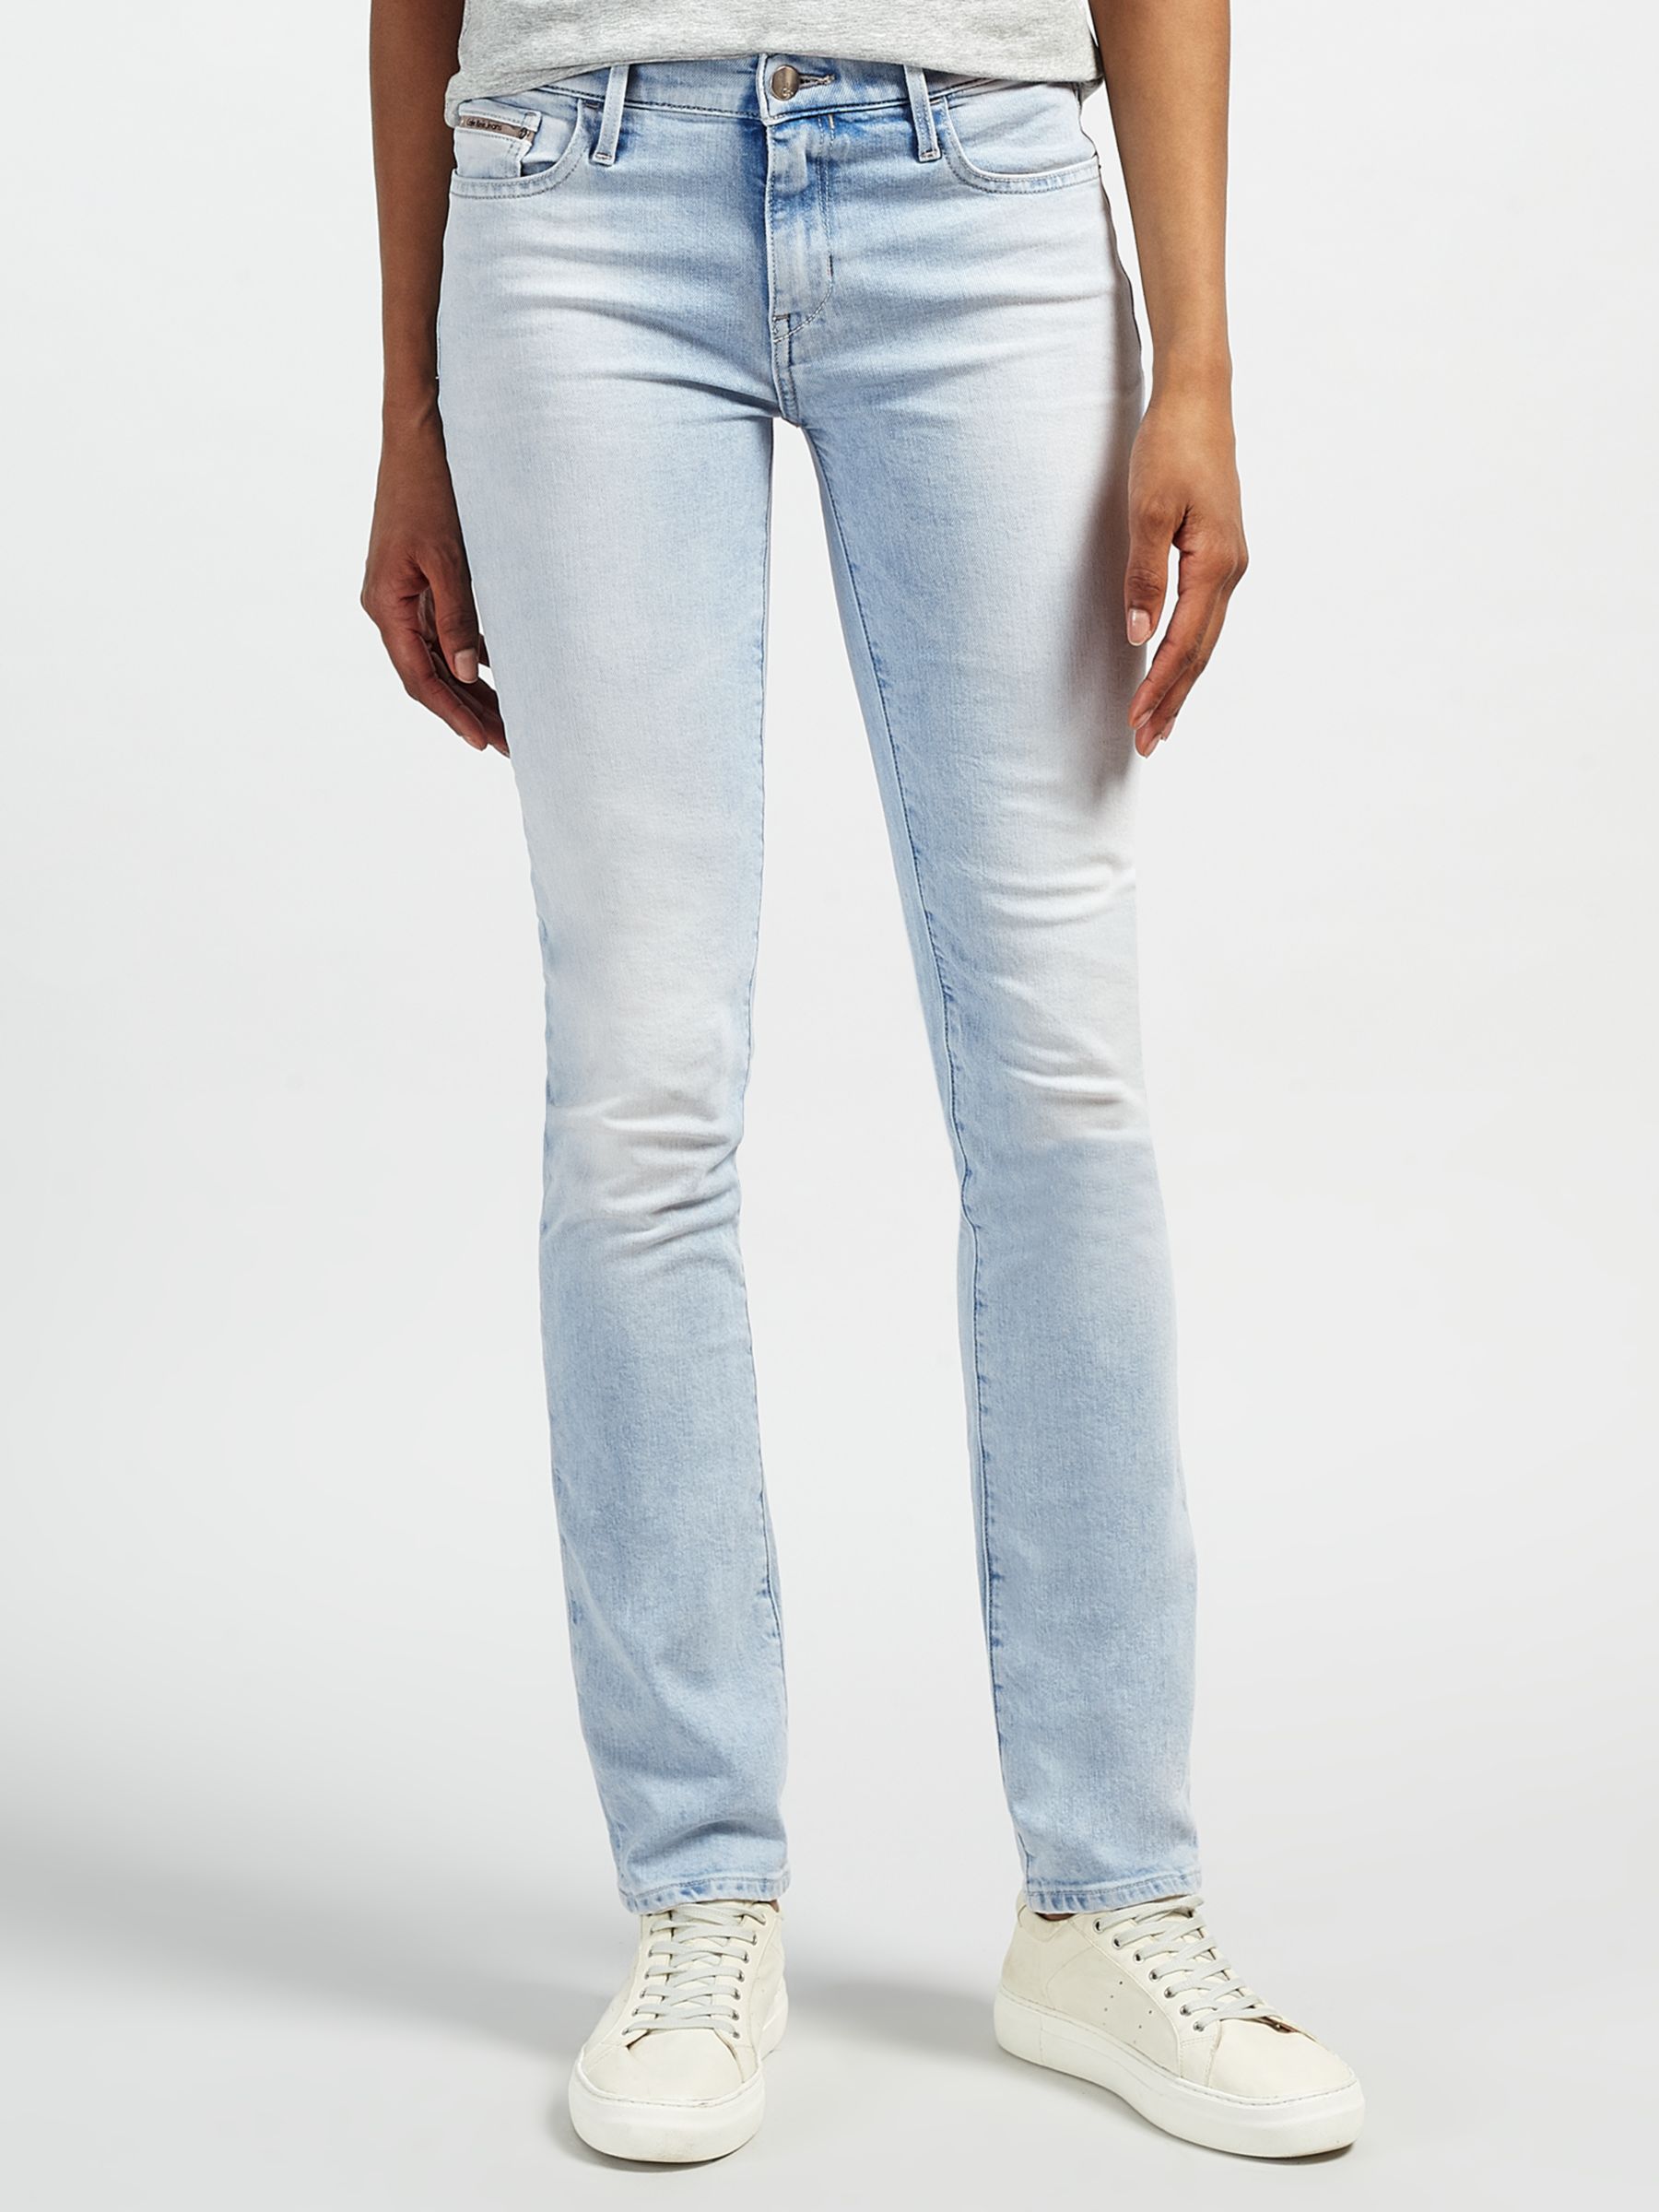 calvin klein women's mid rise straight fit jeans